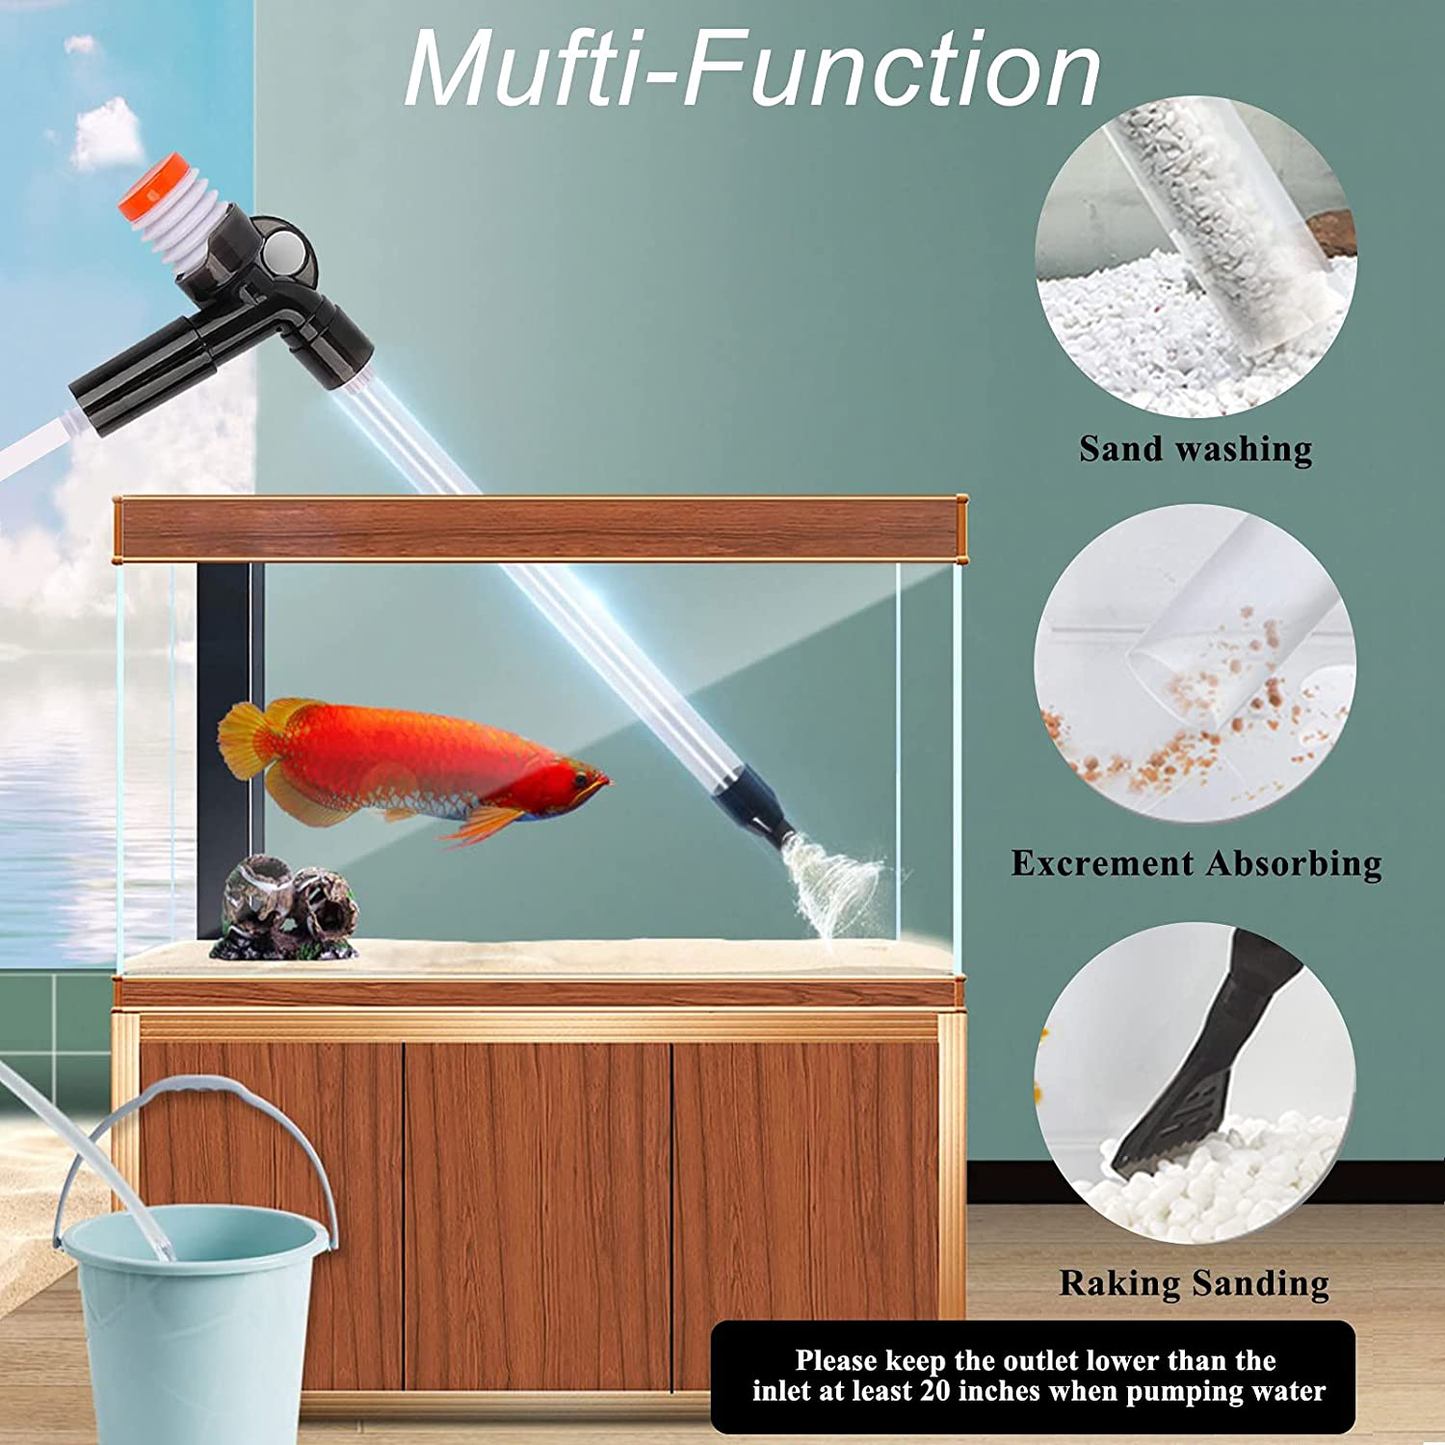 Hachtecpet Aquarium Gravel Vacuum Cleaner: Quick Fish Tank Siphon Cleaning with Algae Scrapers Air-Pressing Button Water Changer Kit for Water Changing | Sand Cleaner Animals & Pet Supplies > Pet Supplies > Fish Supplies > Aquarium Cleaning Supplies Hachtecpet   